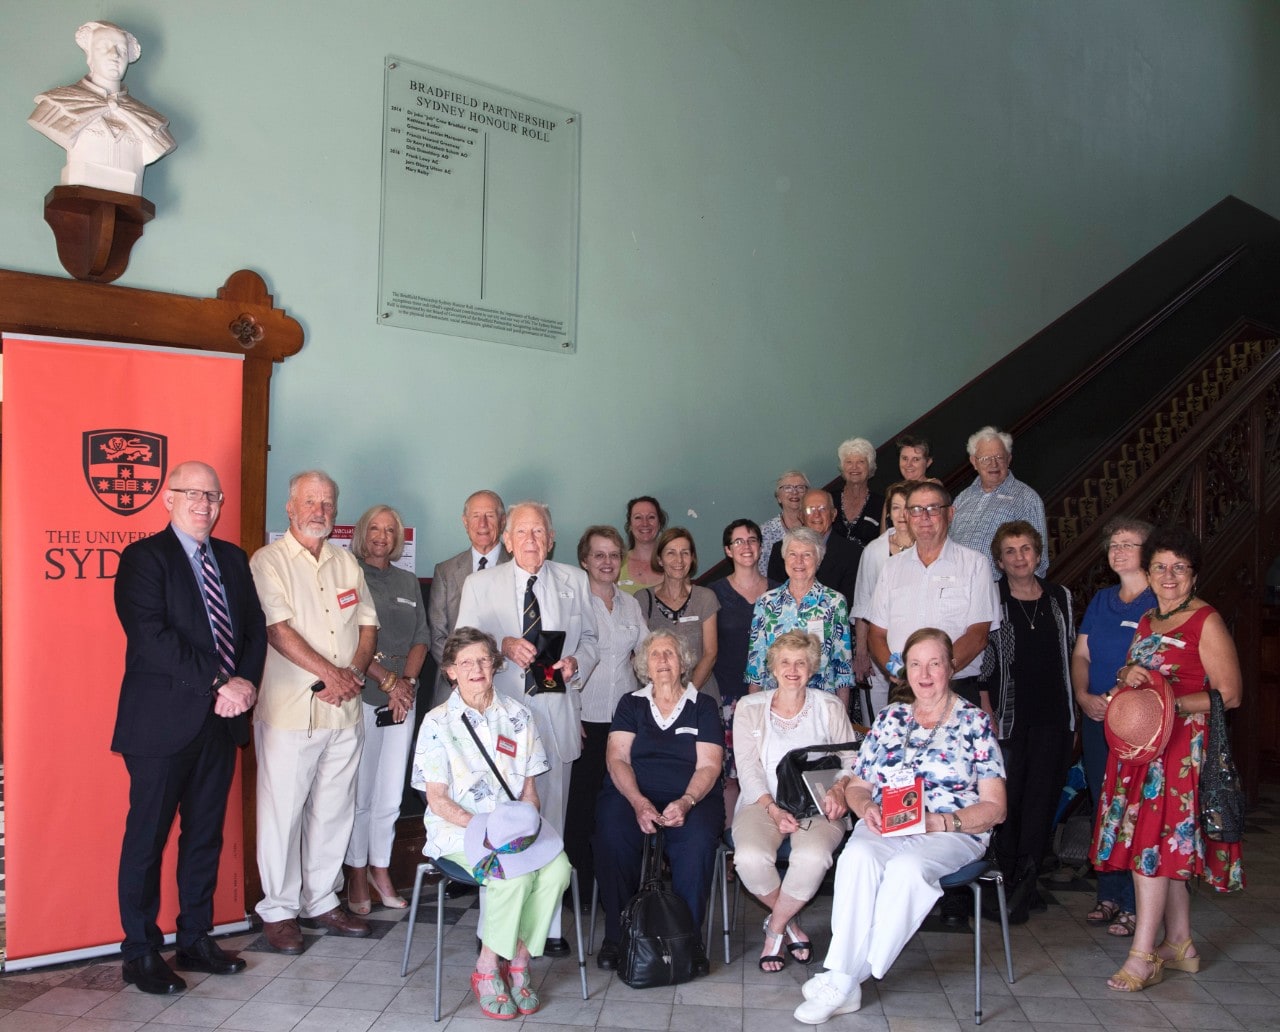 More than 25 descendants of Mary Reibey visiting the Sydney Honour Roll featuring her name at the University of Sydney.